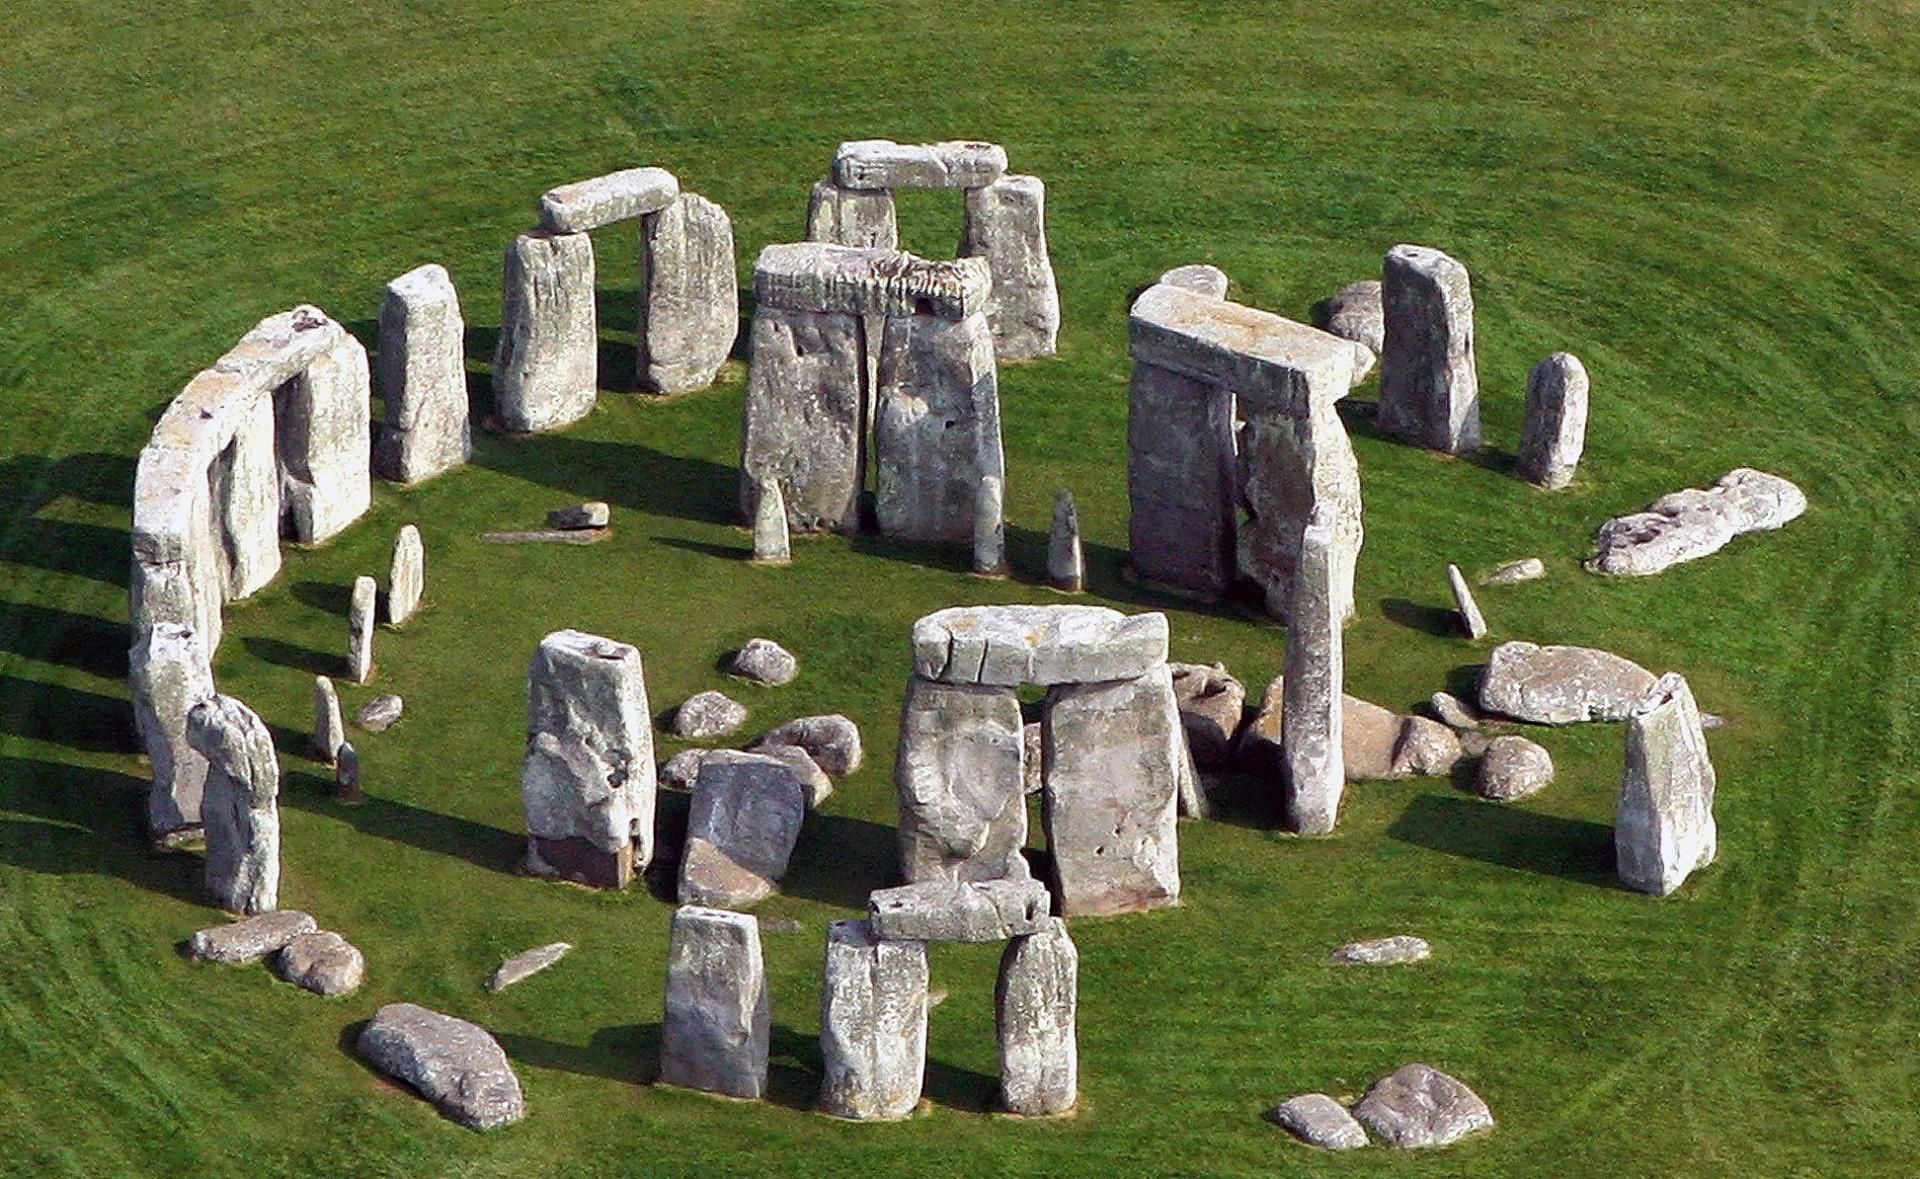 48-stonehenge-wiltshire-c-dave-white-cropped0f03643af114dd91fae10a4d25092d4d-64ef7f2a64217ed3c70e6a7e053e1727.jpg